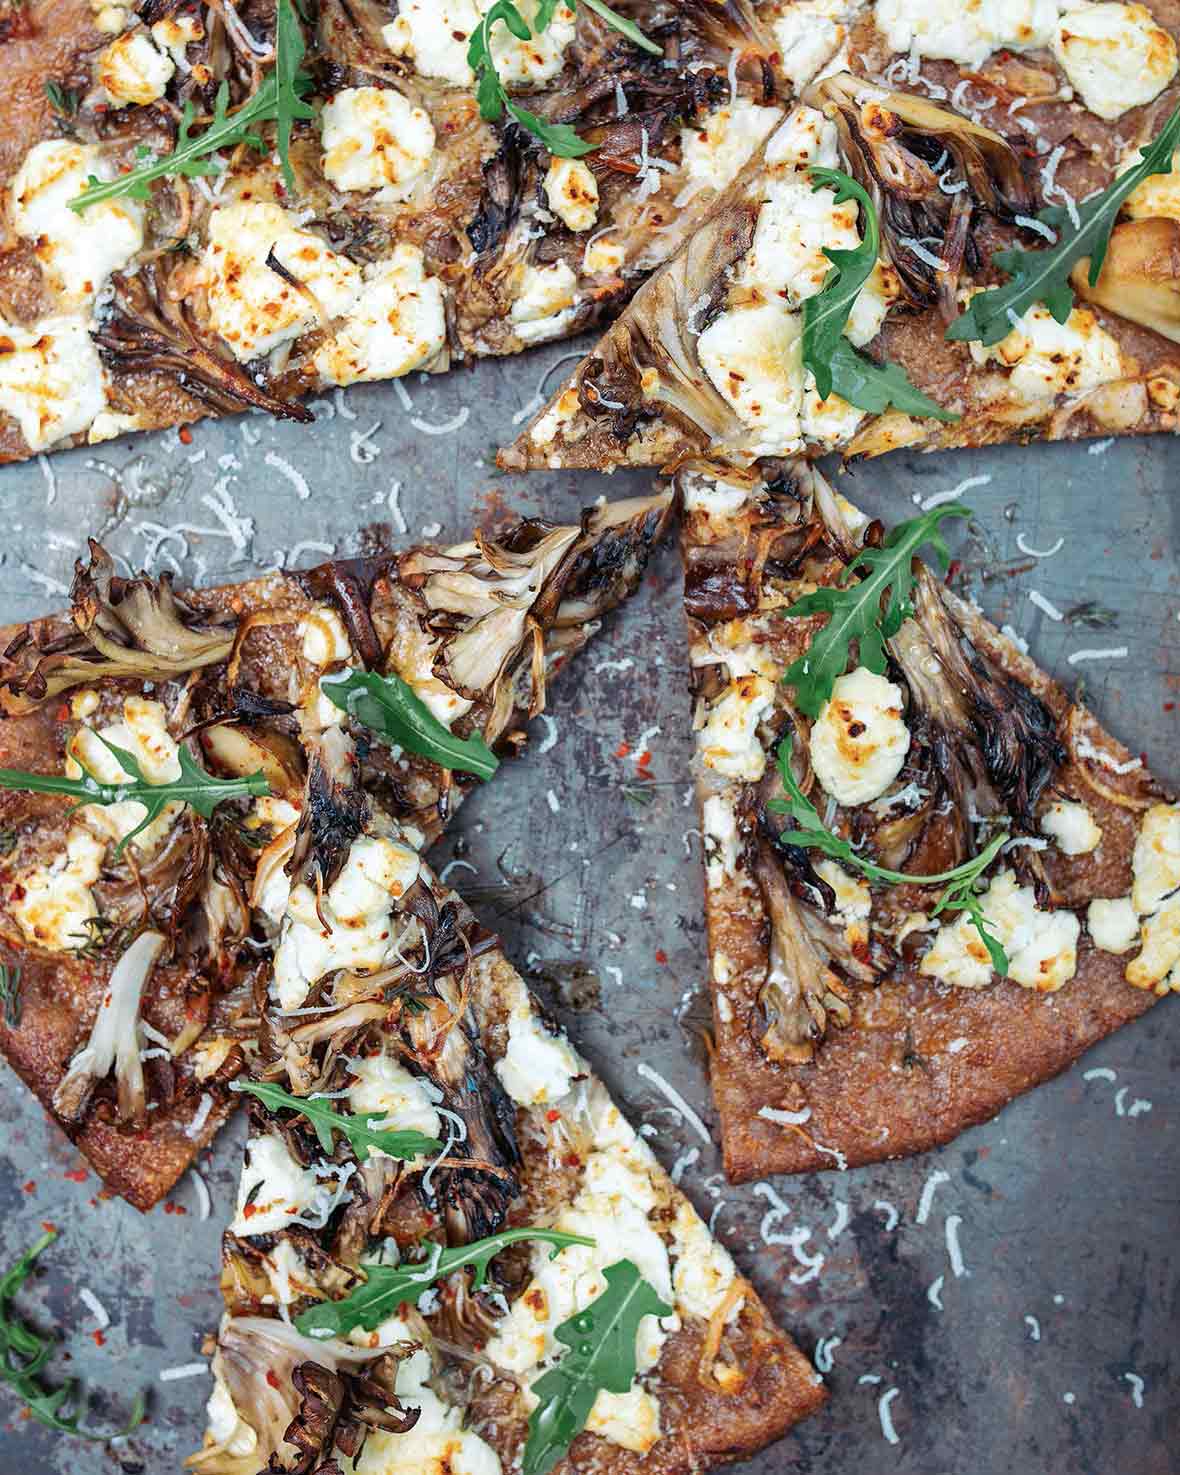 A mushroom and goat cheese pizza topped with dandelion leaves cut into six slices